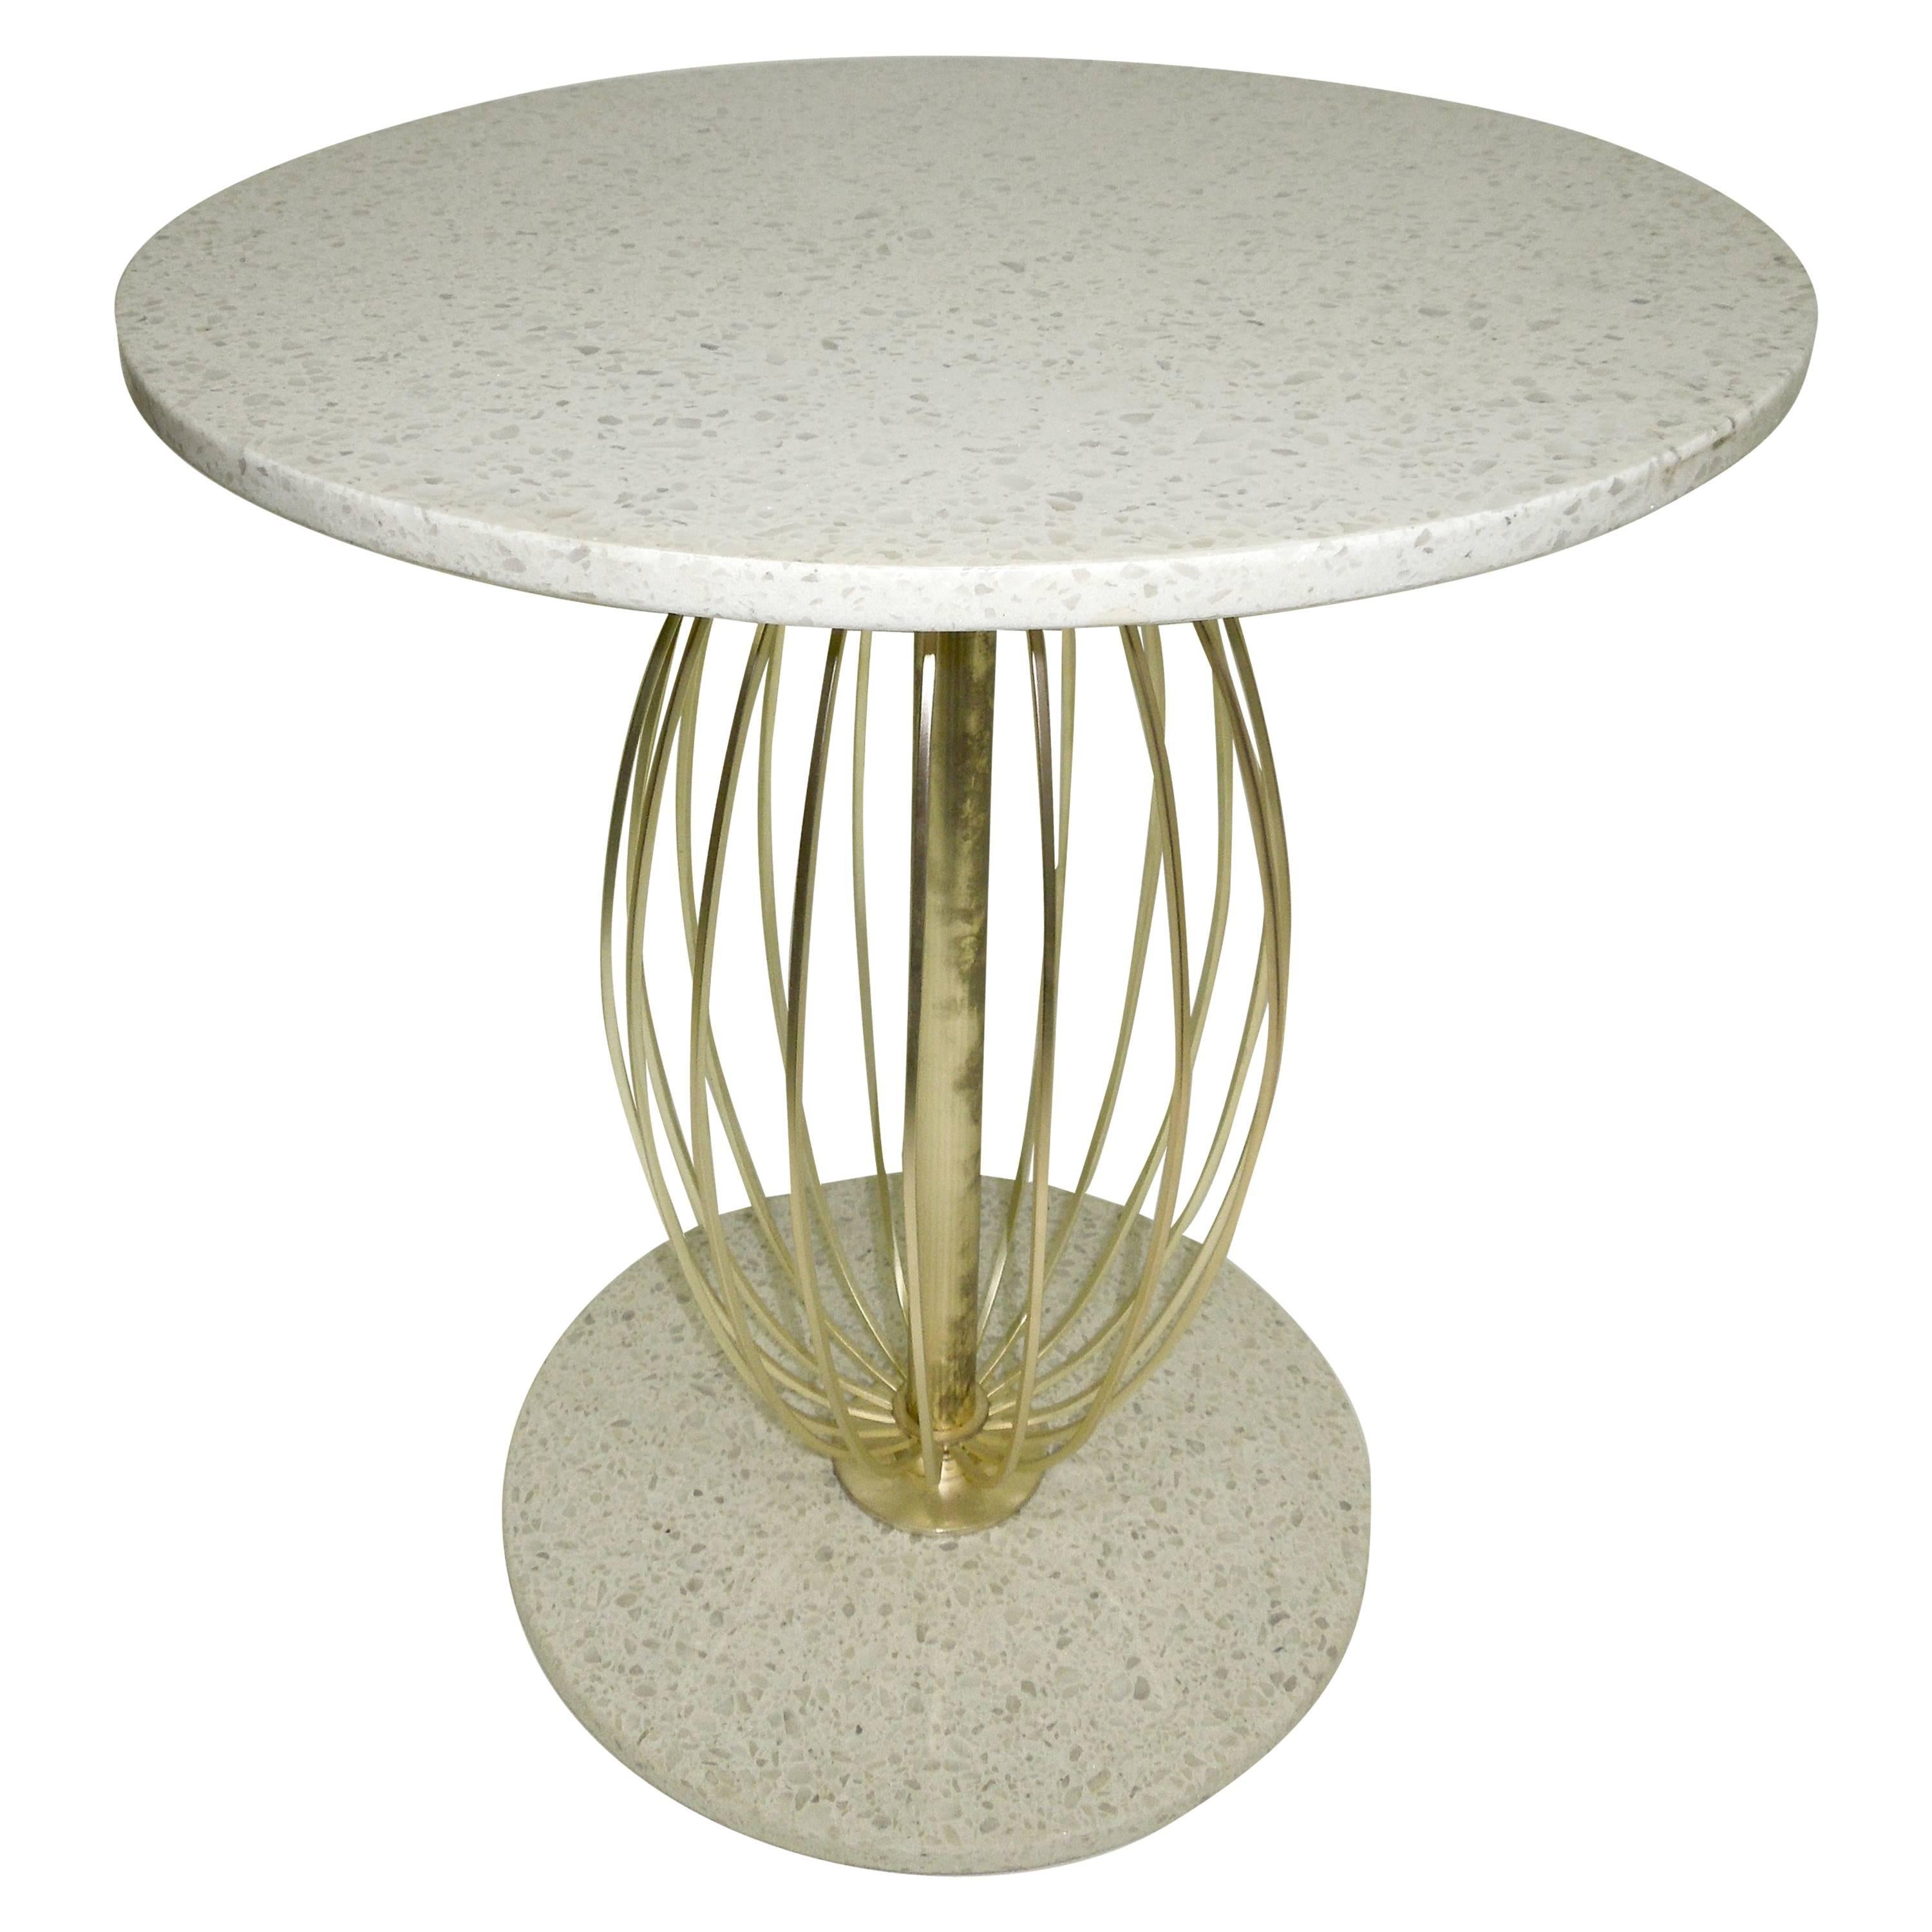 Terrazzo "Poodle" Table Designed by Barbara Barry for Henredon